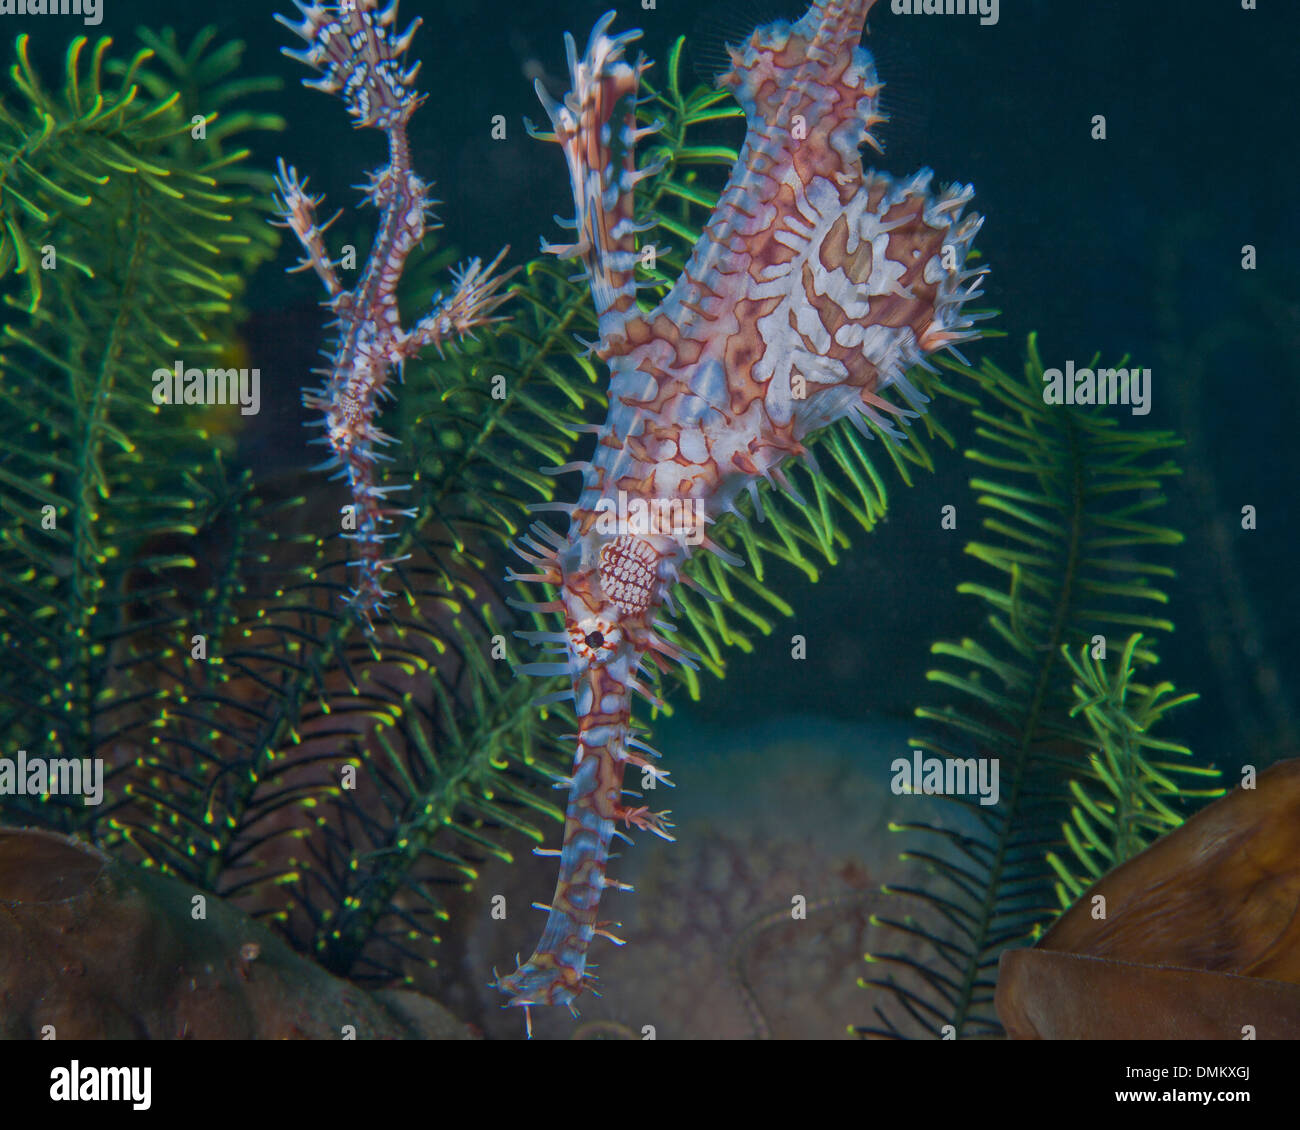 A pair of Harlequin ornate ghost pipefish (Solenostomus paradoxus) in green crinoids. Lembeh Straits, Indonesia. Stock Photo